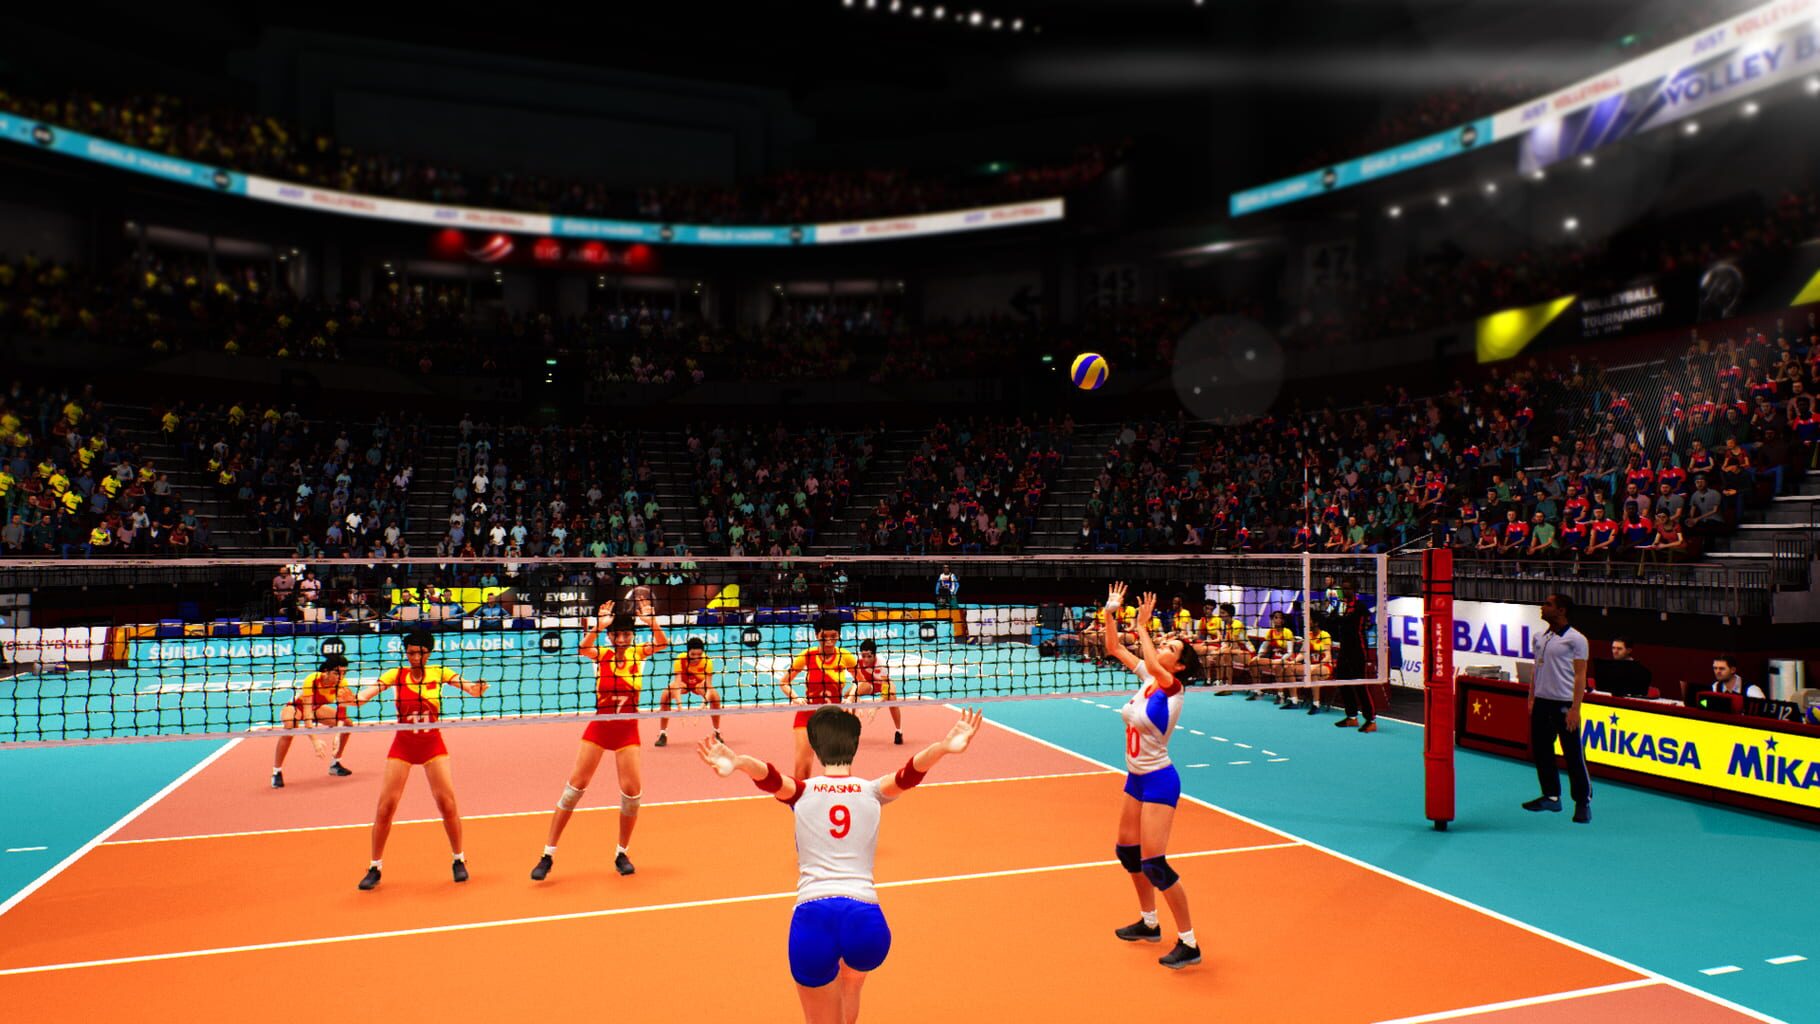 Spike Volleyball Image